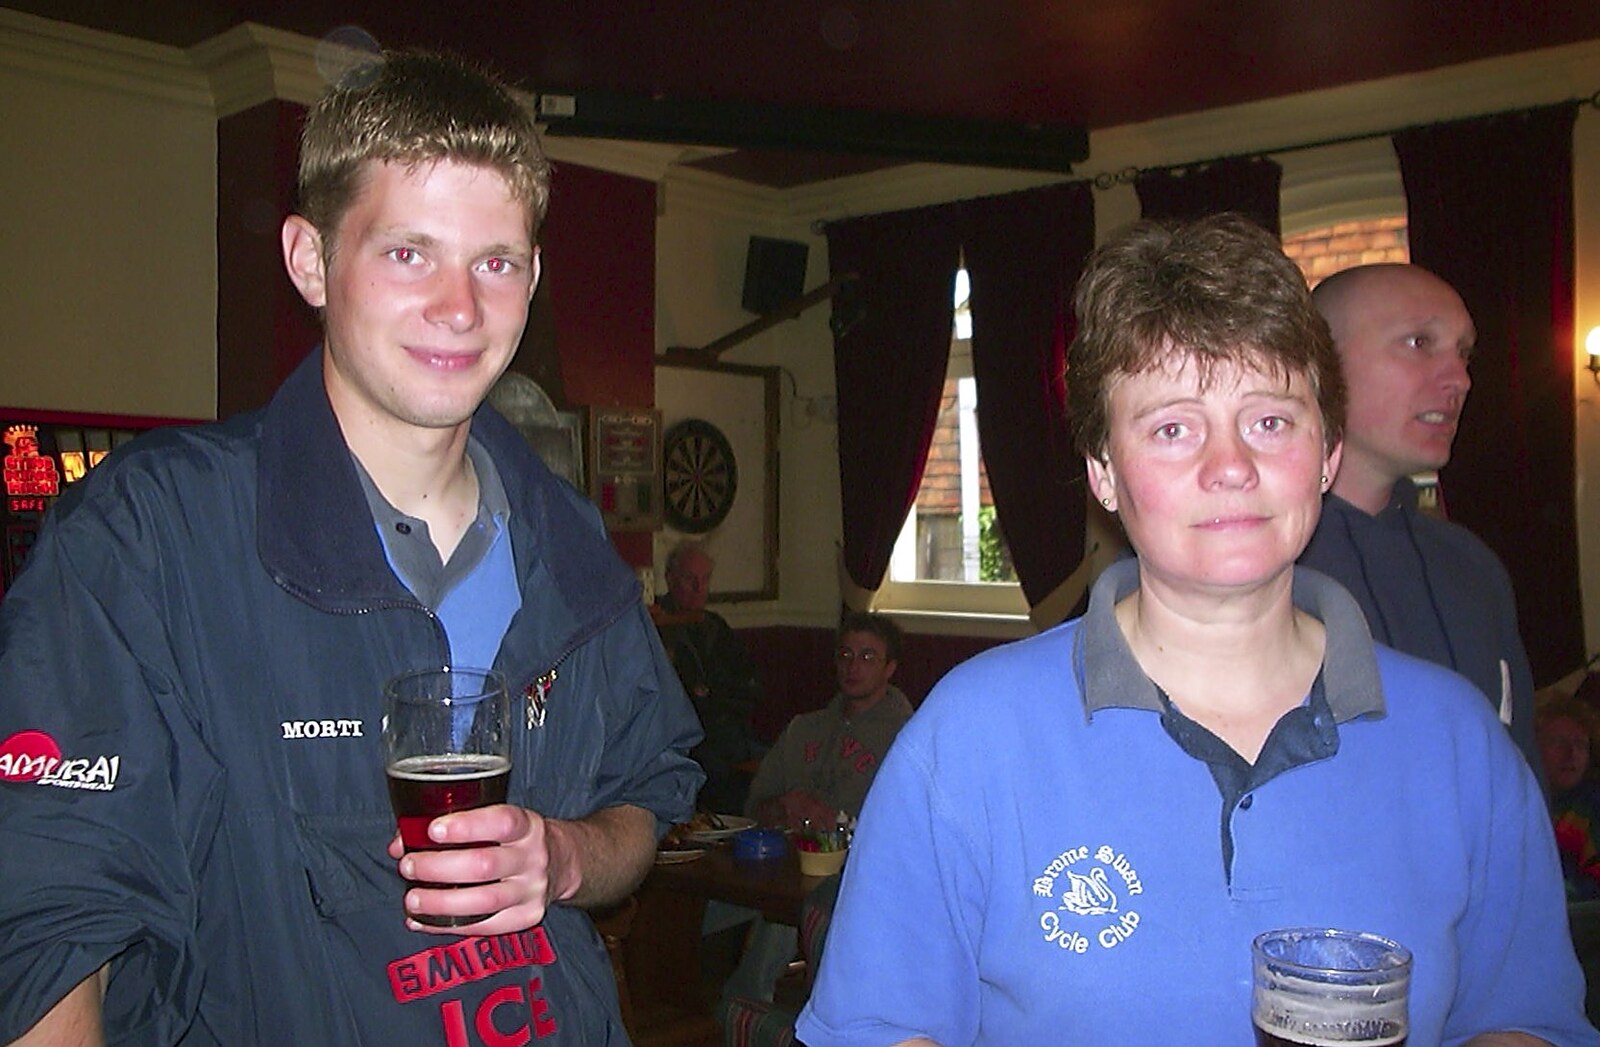 The BSCC Annual Bike Ride, Lenham, Kent - 8th May 2004: The Boy Phil and Pippa in The Vine Inn, Tenterden